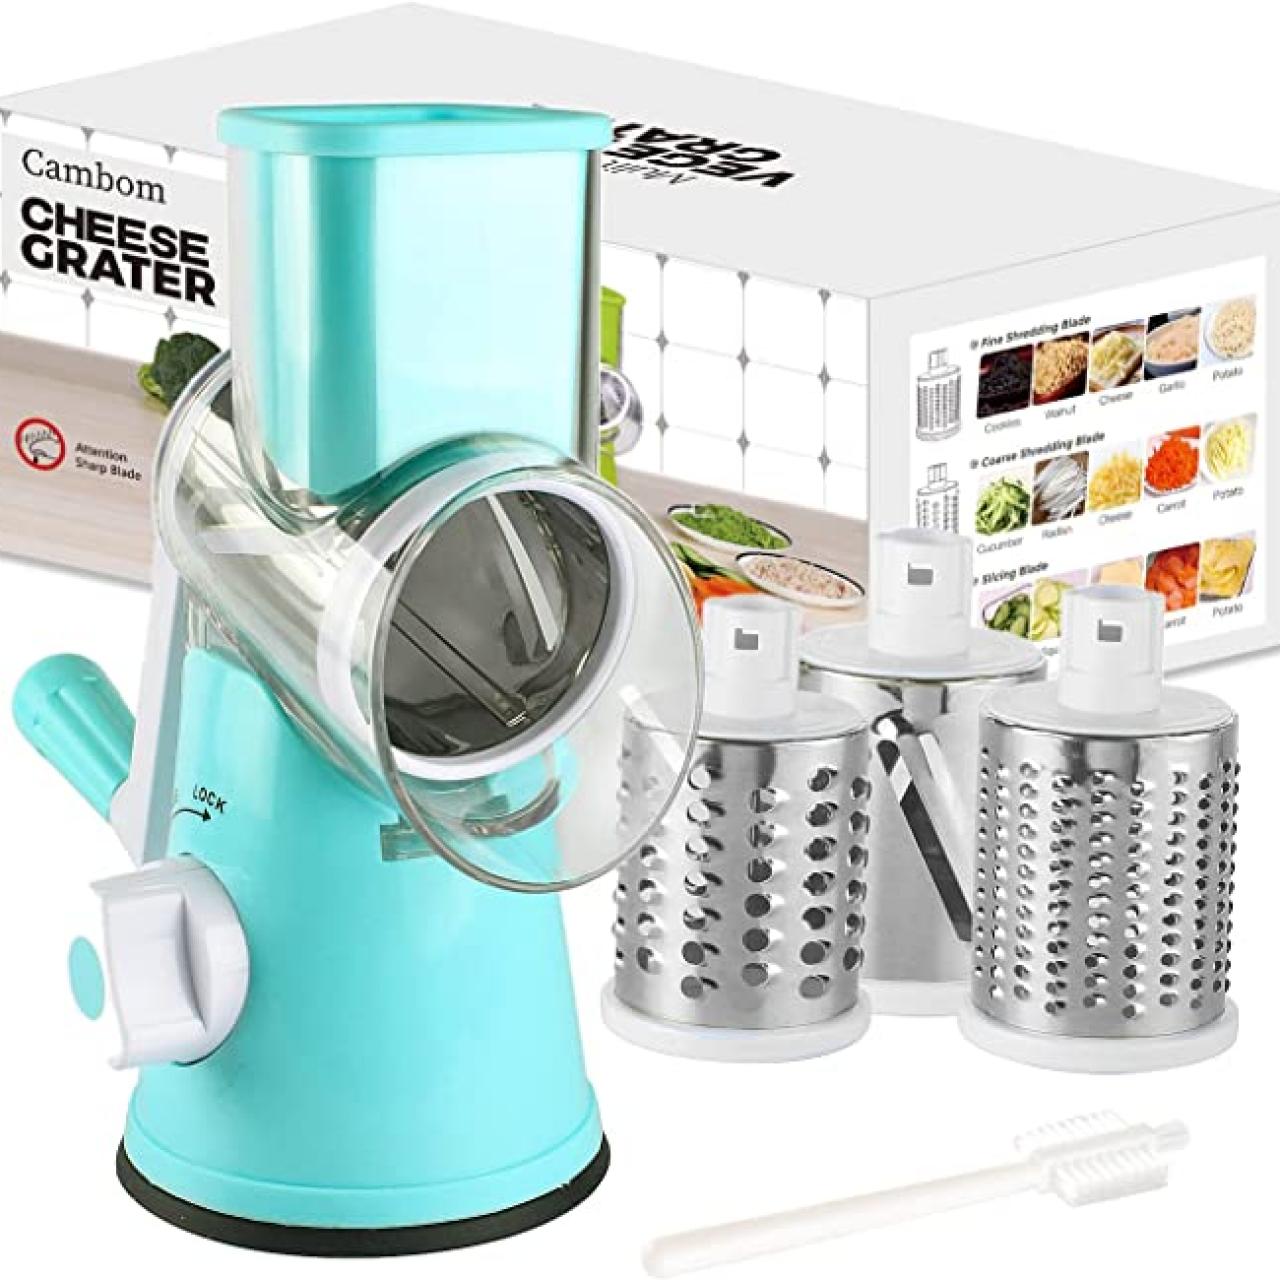 10 Popular TikTok Kitchen Gadgets and Tools That Will Make Your Life Easier